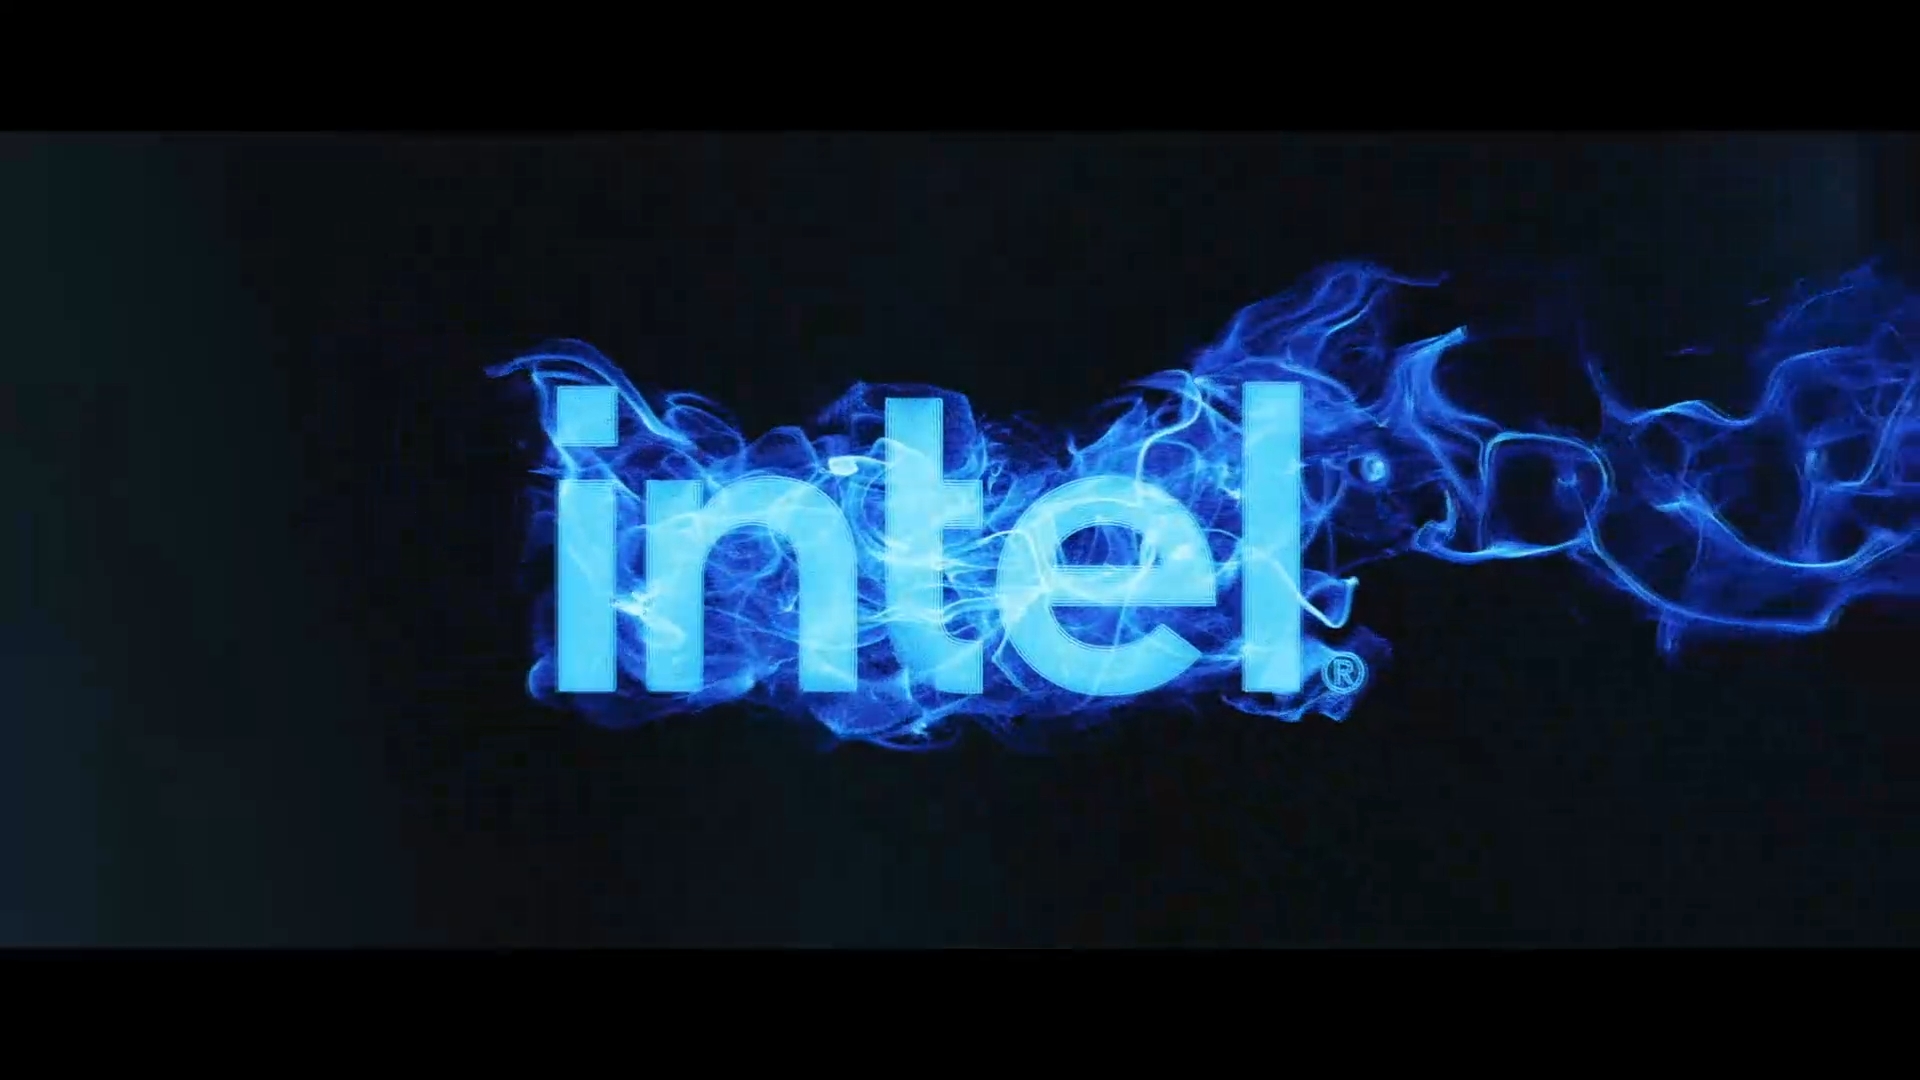 Intel Alder Lake Core I5 Cpu You Can’t Buy Hits A Staggering 5.7ghz Overclock